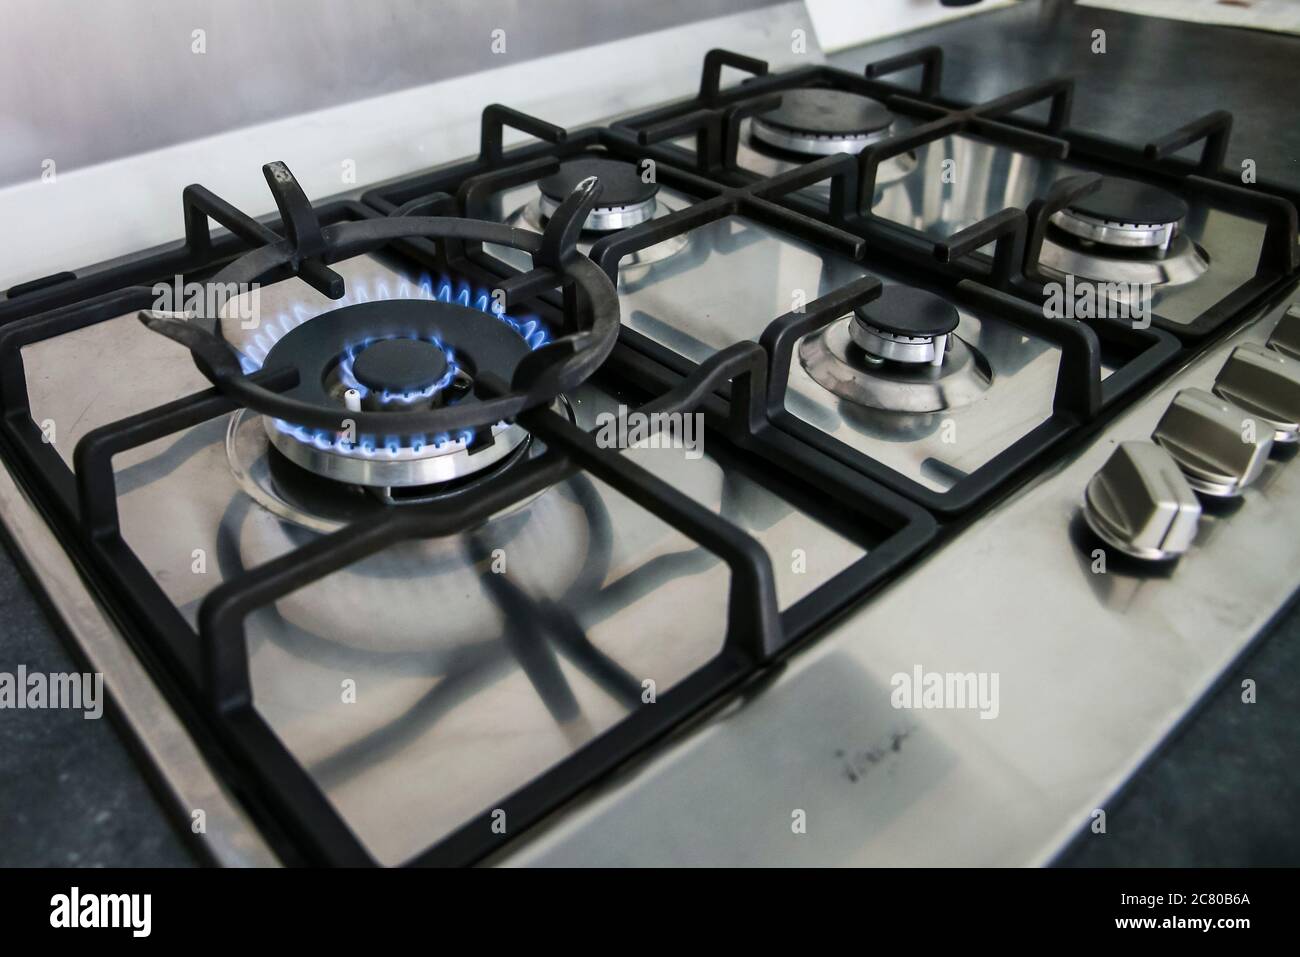 UTRECHT, 19-07-2020, stock, Gas cooking is the most famous form of cooking is still widely used. It therefore has many advantages. For example, the temperature is to regulate, so you